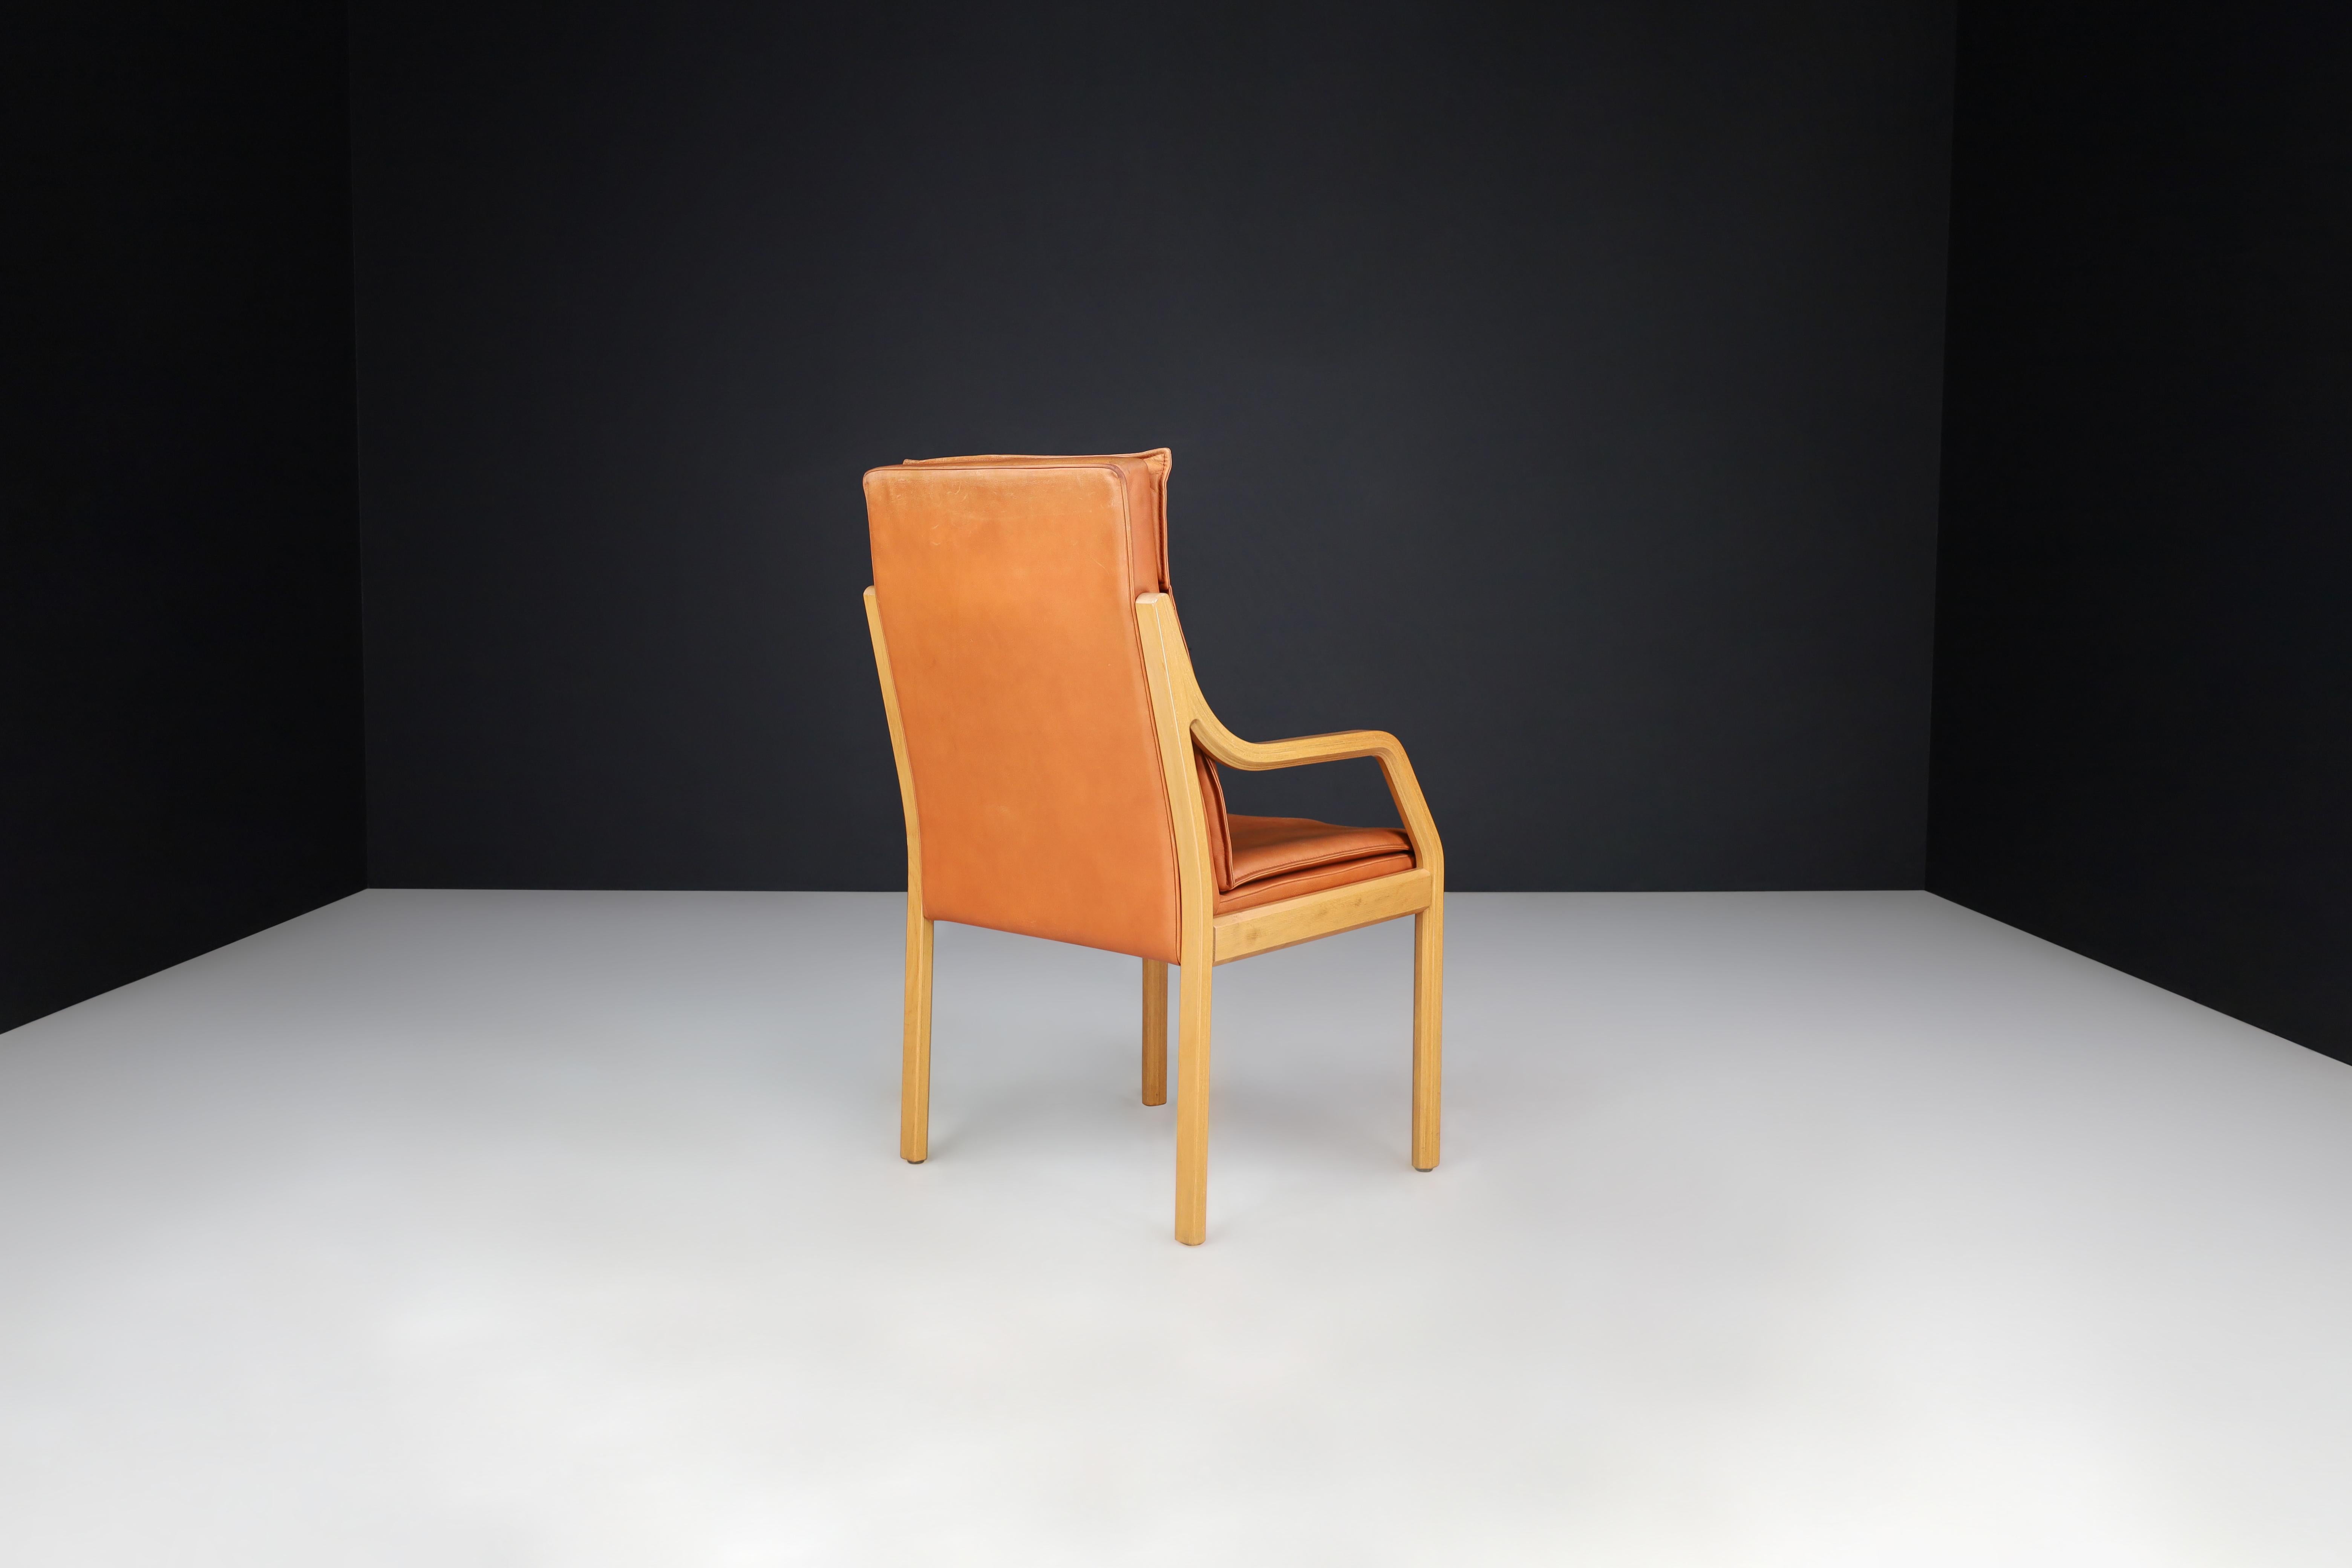 Walter Knoll Set of 16 Dining Room Chairs in Bentwood and Leather, Germany 1970s For Sale 2